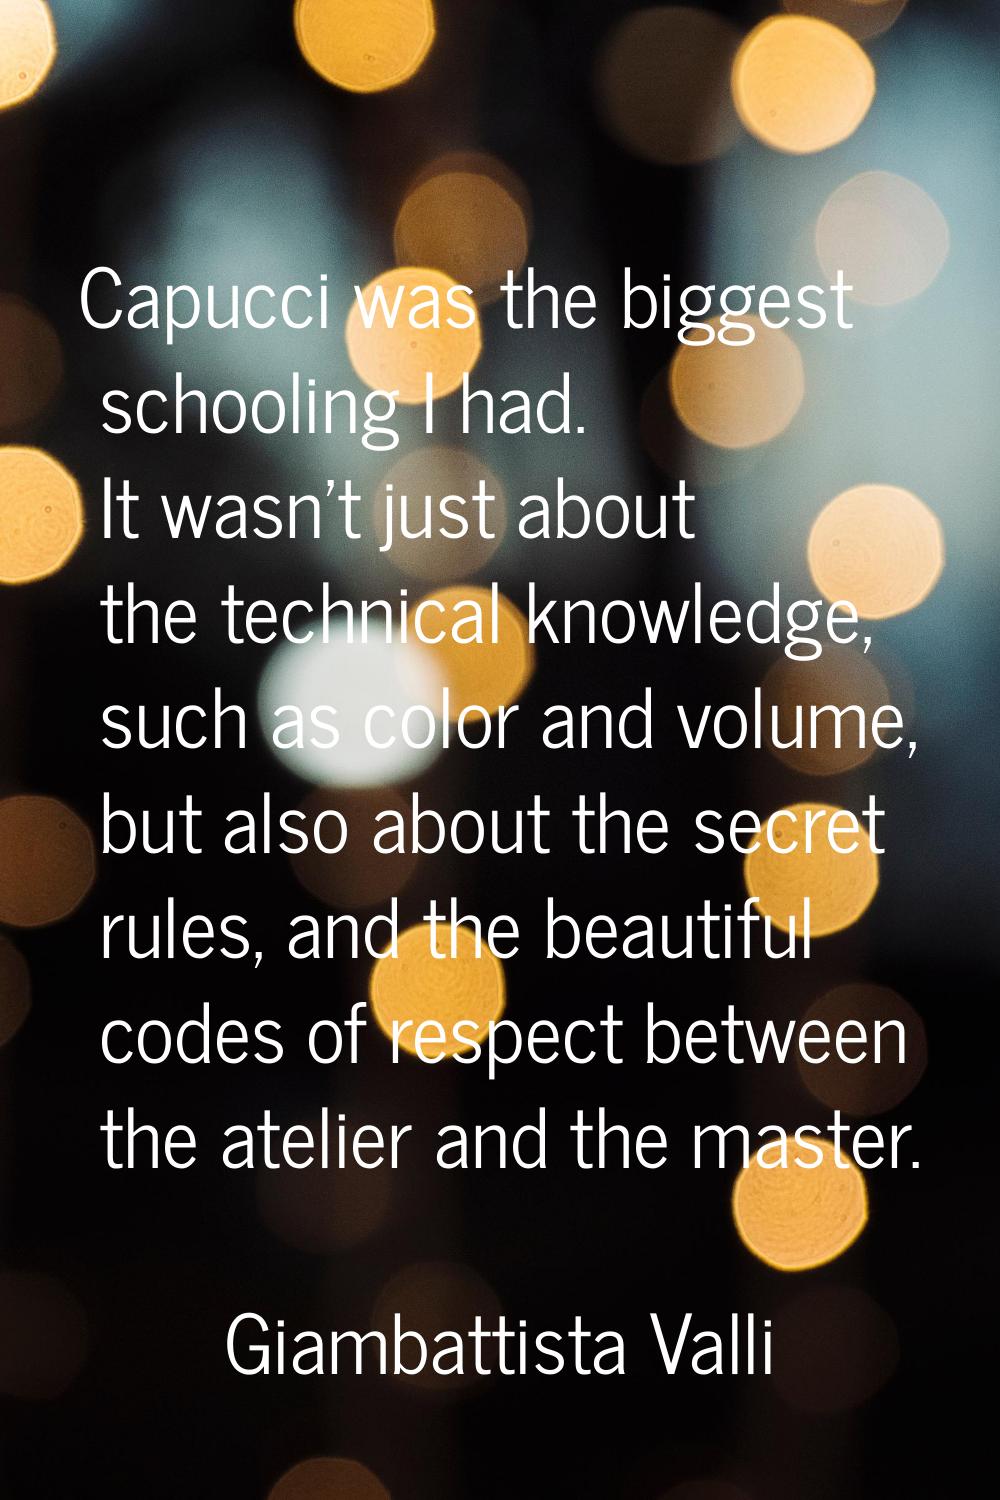 Capucci was the biggest schooling I had. It wasn't just about the technical knowledge, such as colo